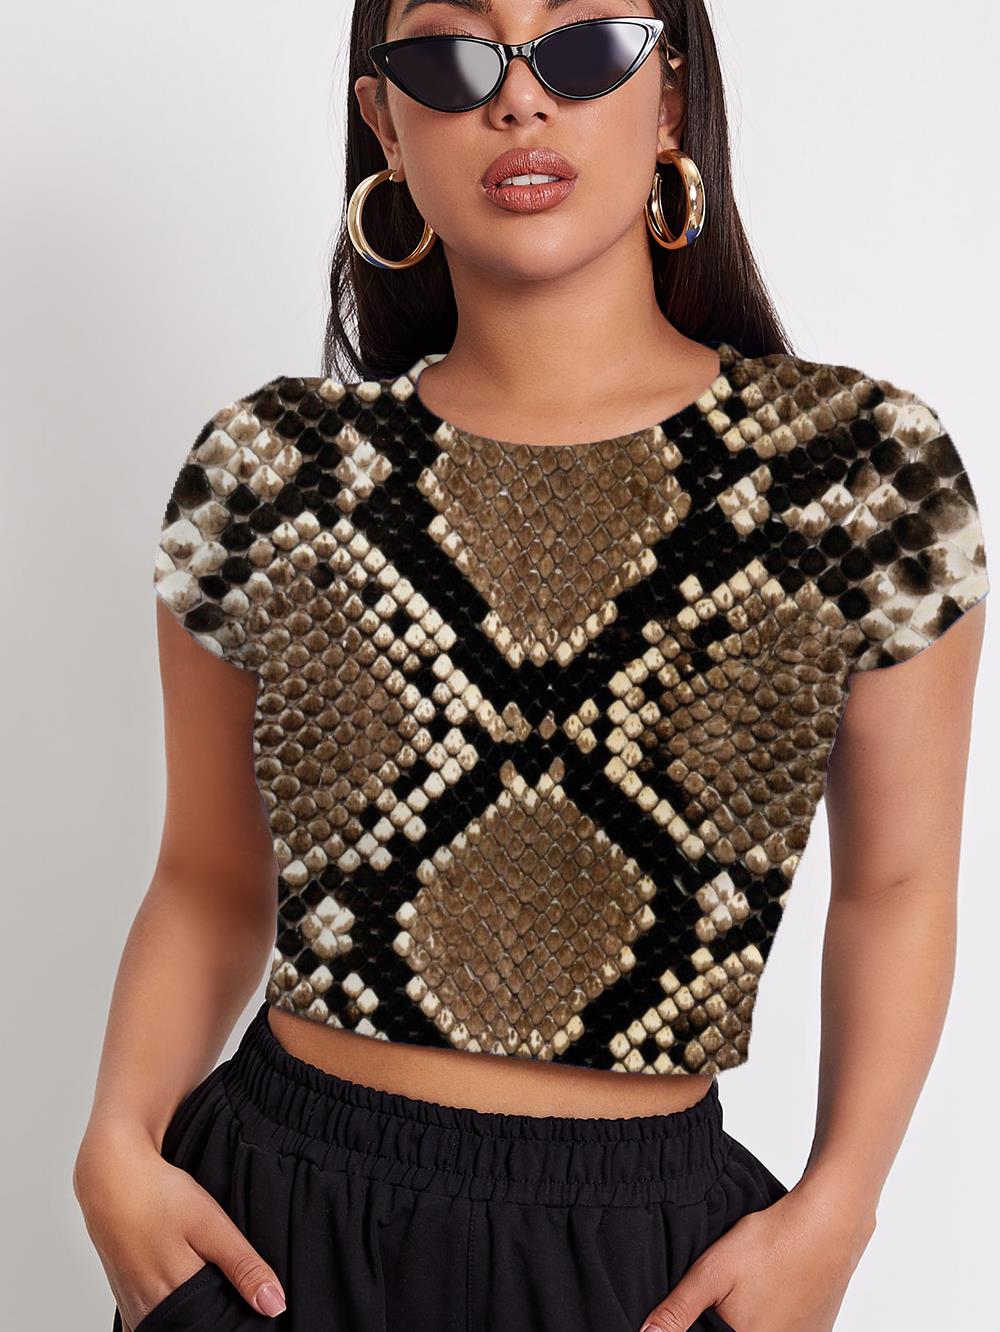 Python Crop Top | Snakes Jewelry & Fashion